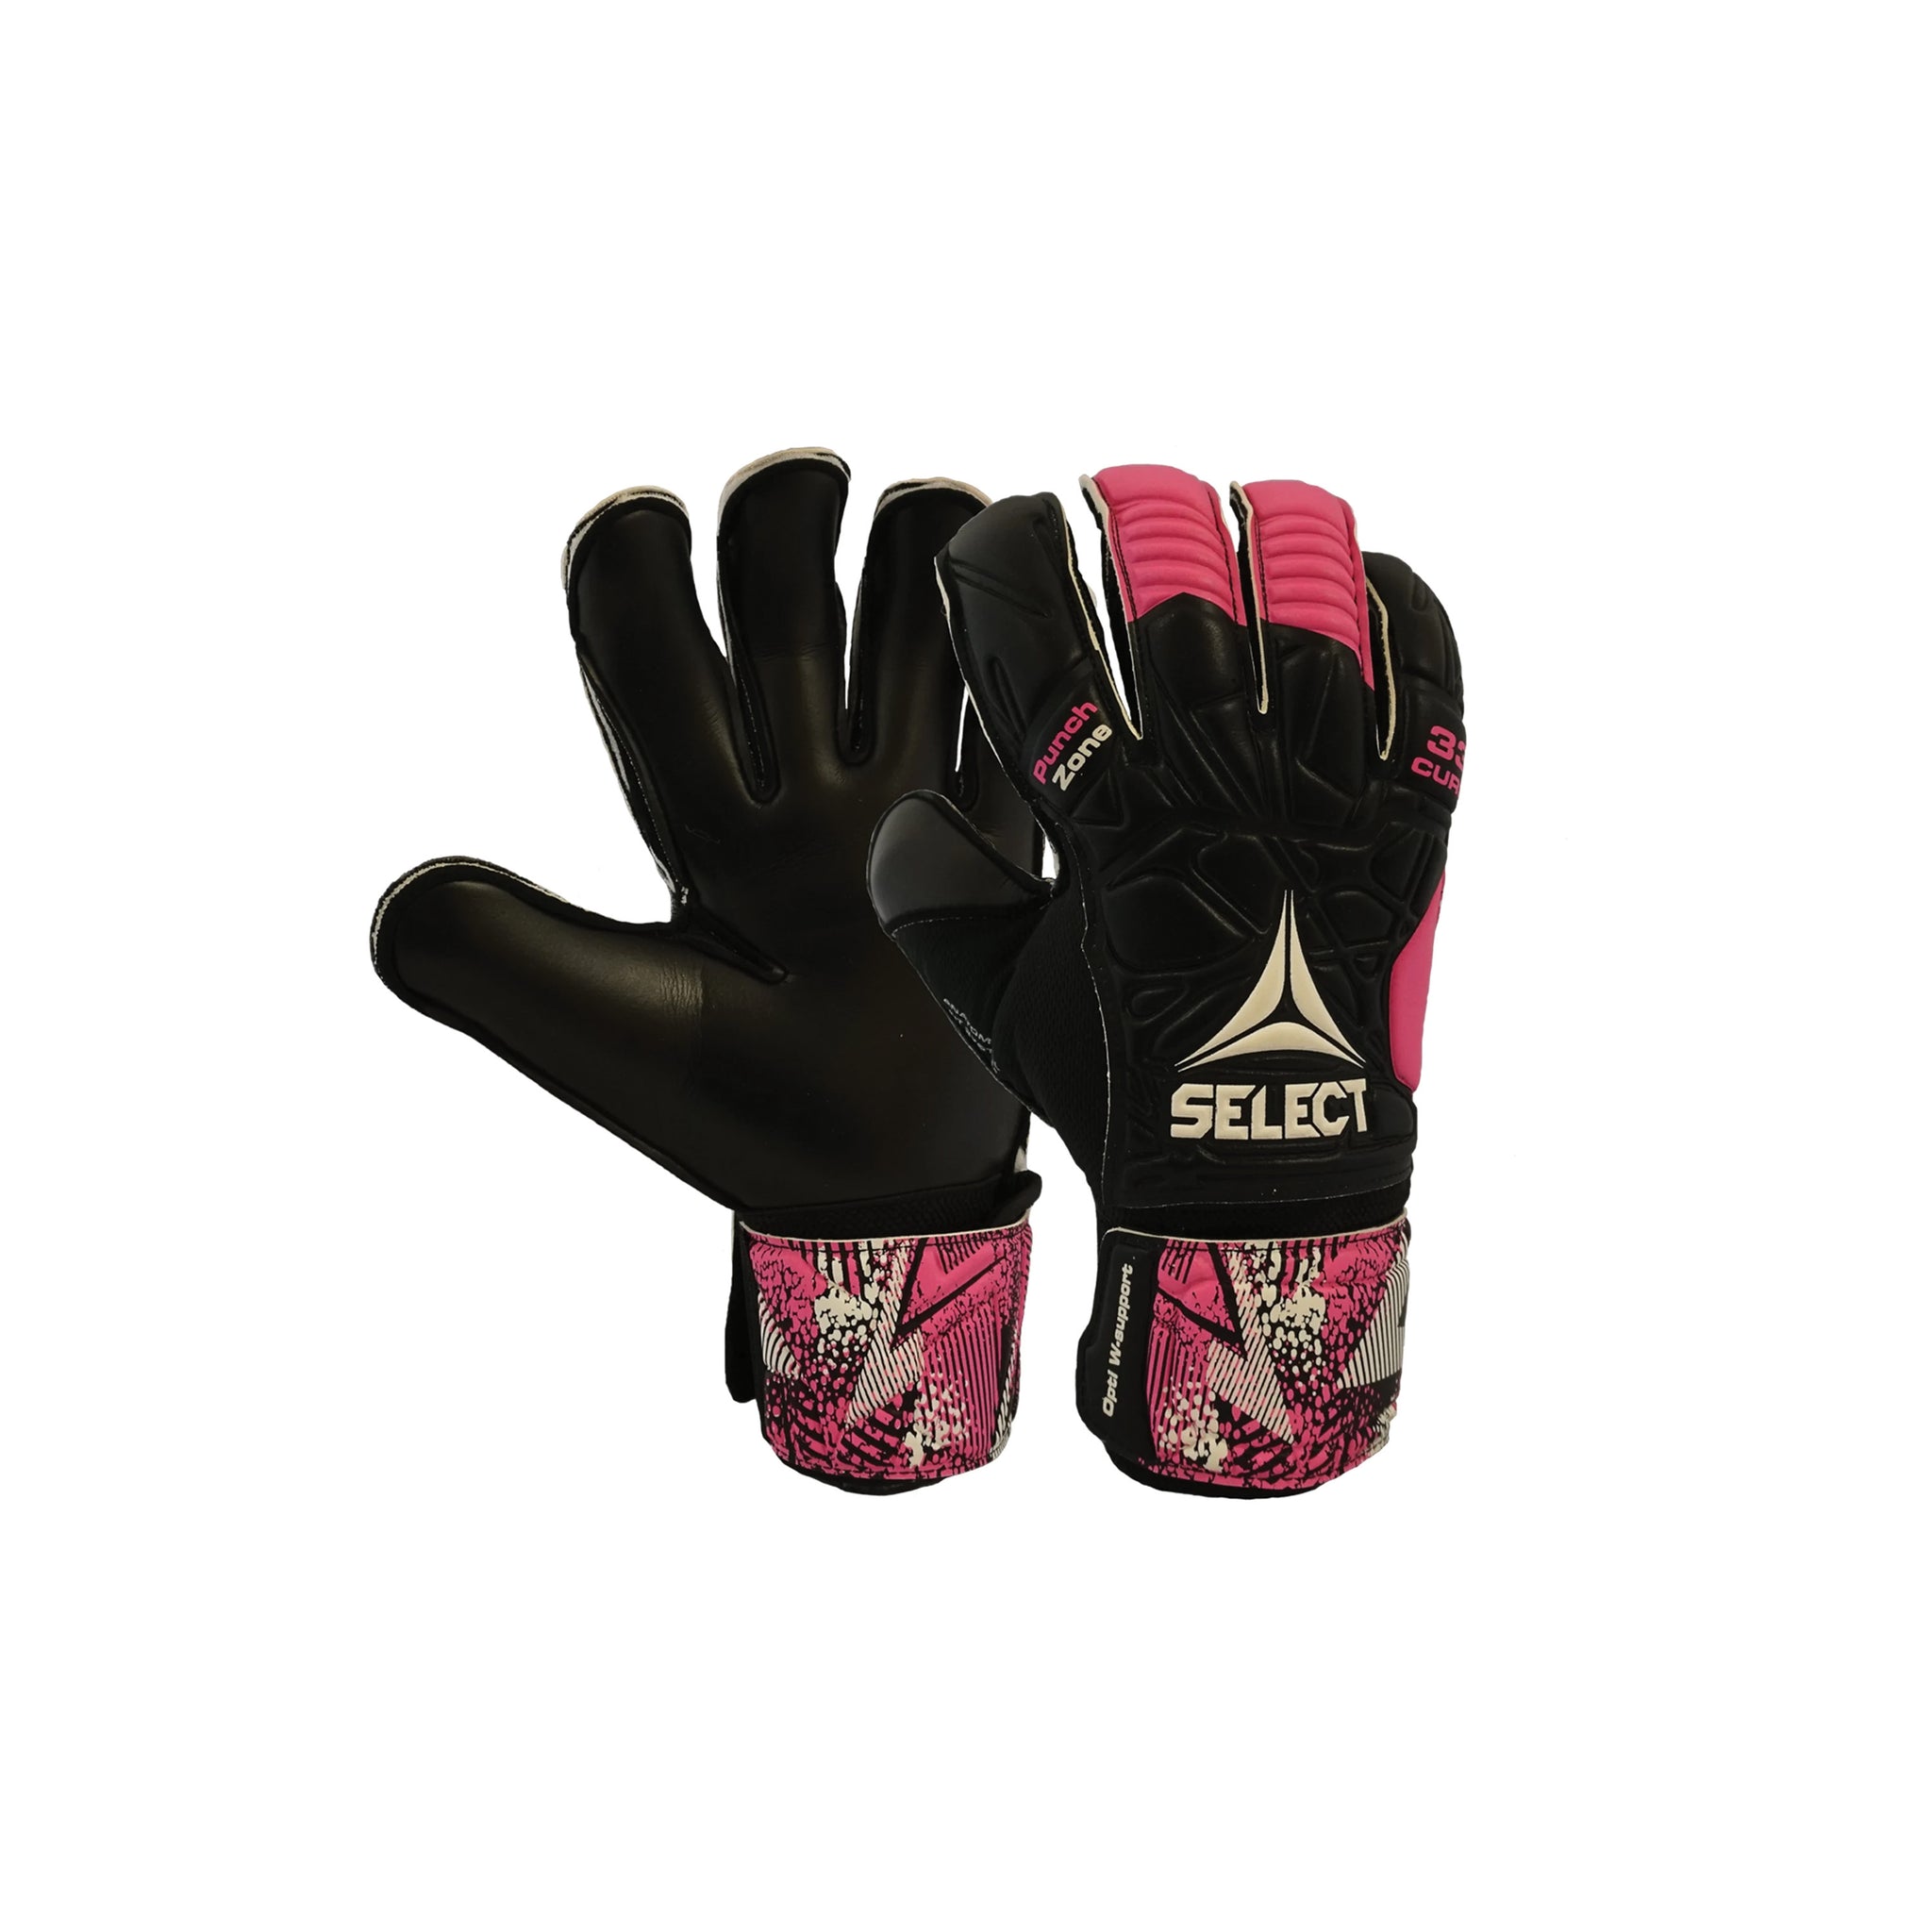 SELECT 33 Protect Cure Gloves